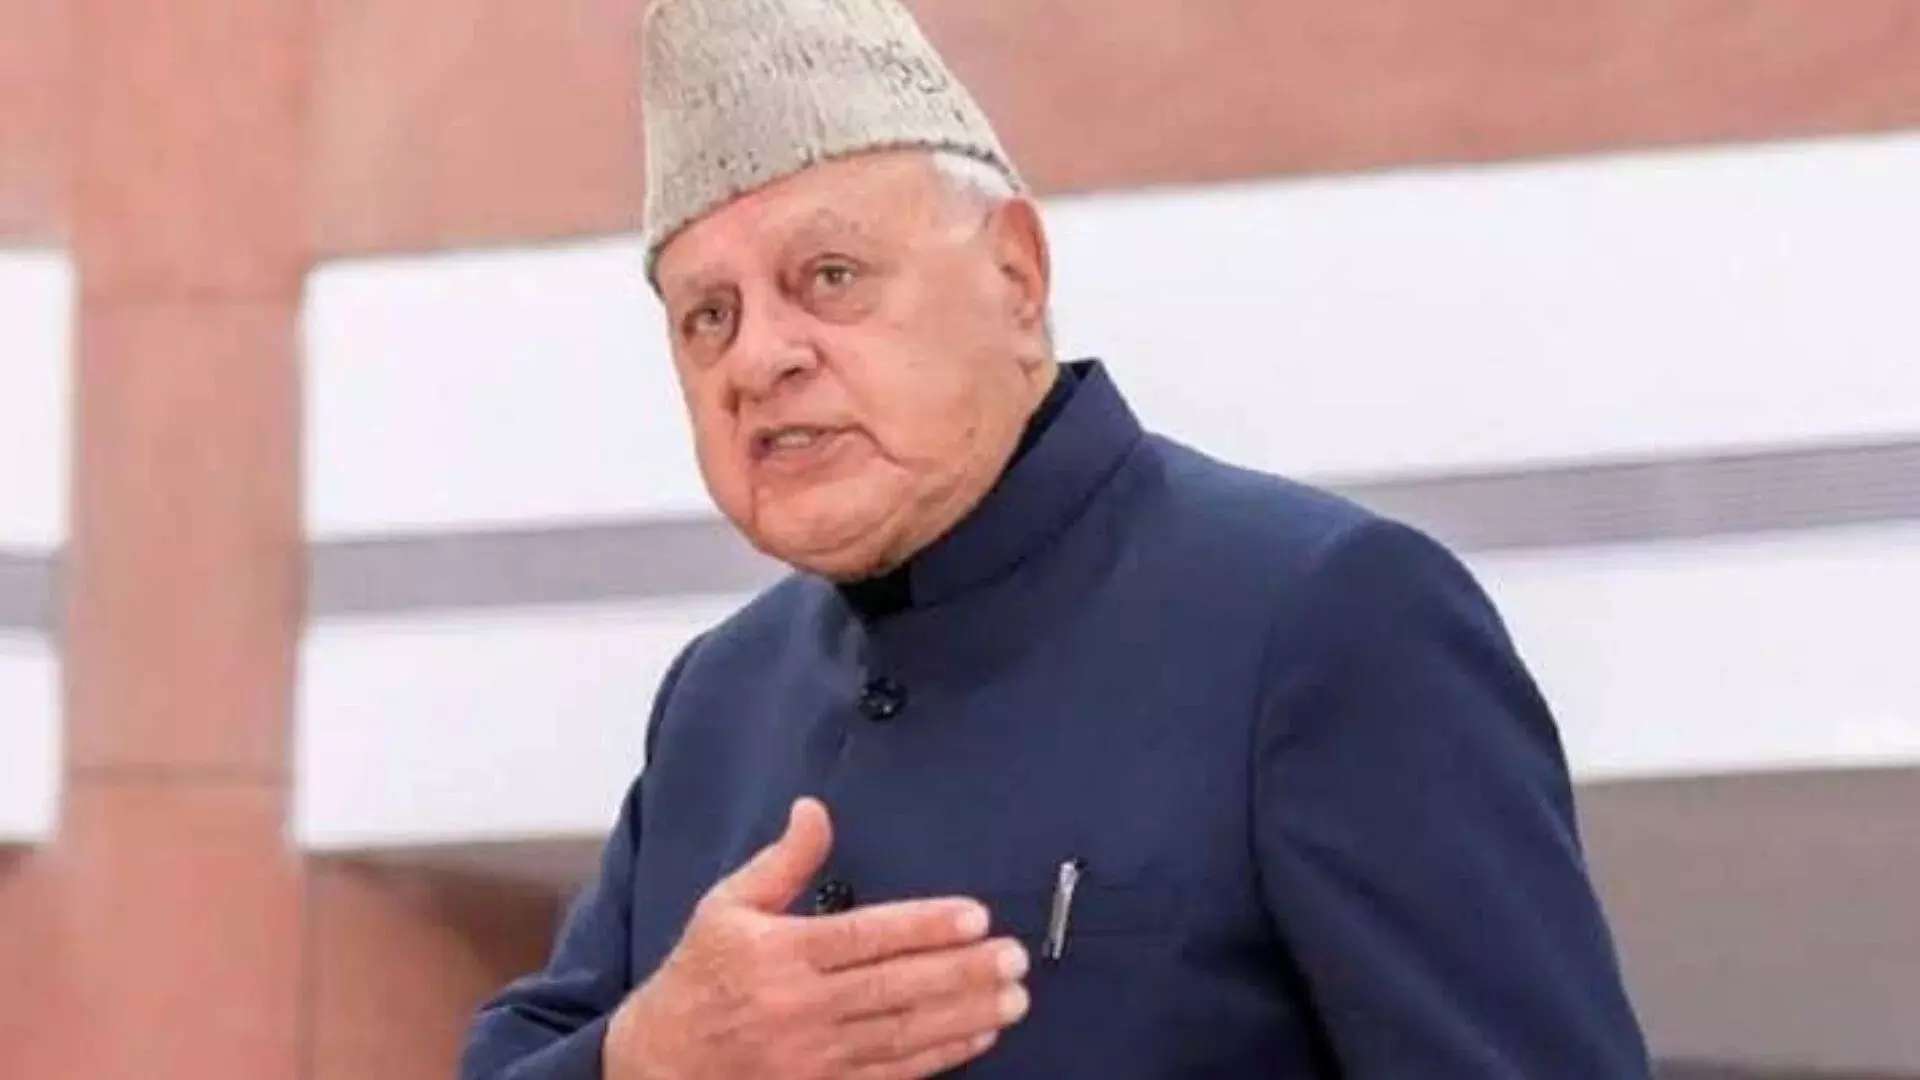 EVM a theft machine, make sure you voted the right party: Farooq Abdullah